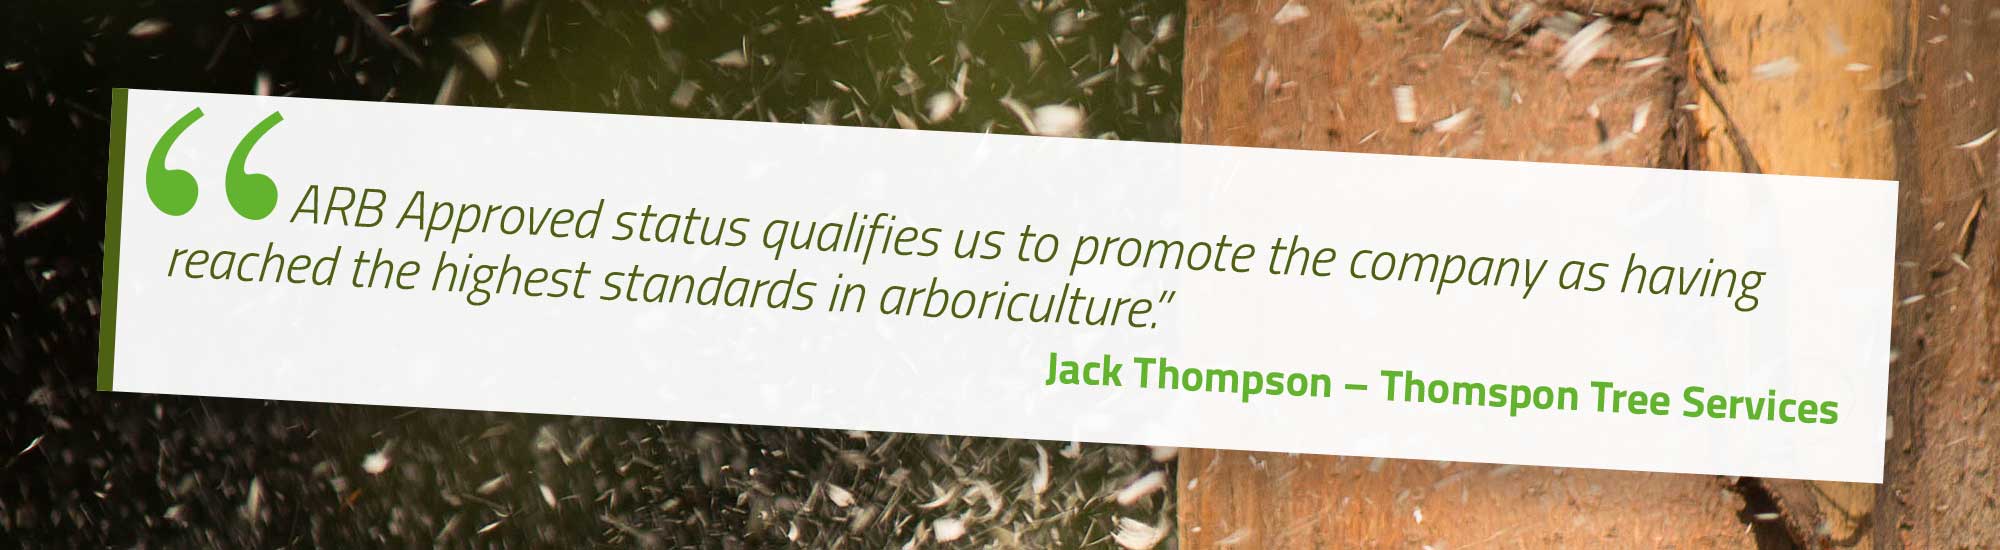 ARB Approved status qualifies us to promote the company as having reached the highest standards in arboriculture. Jack Thompson – Thomspon Tree Services